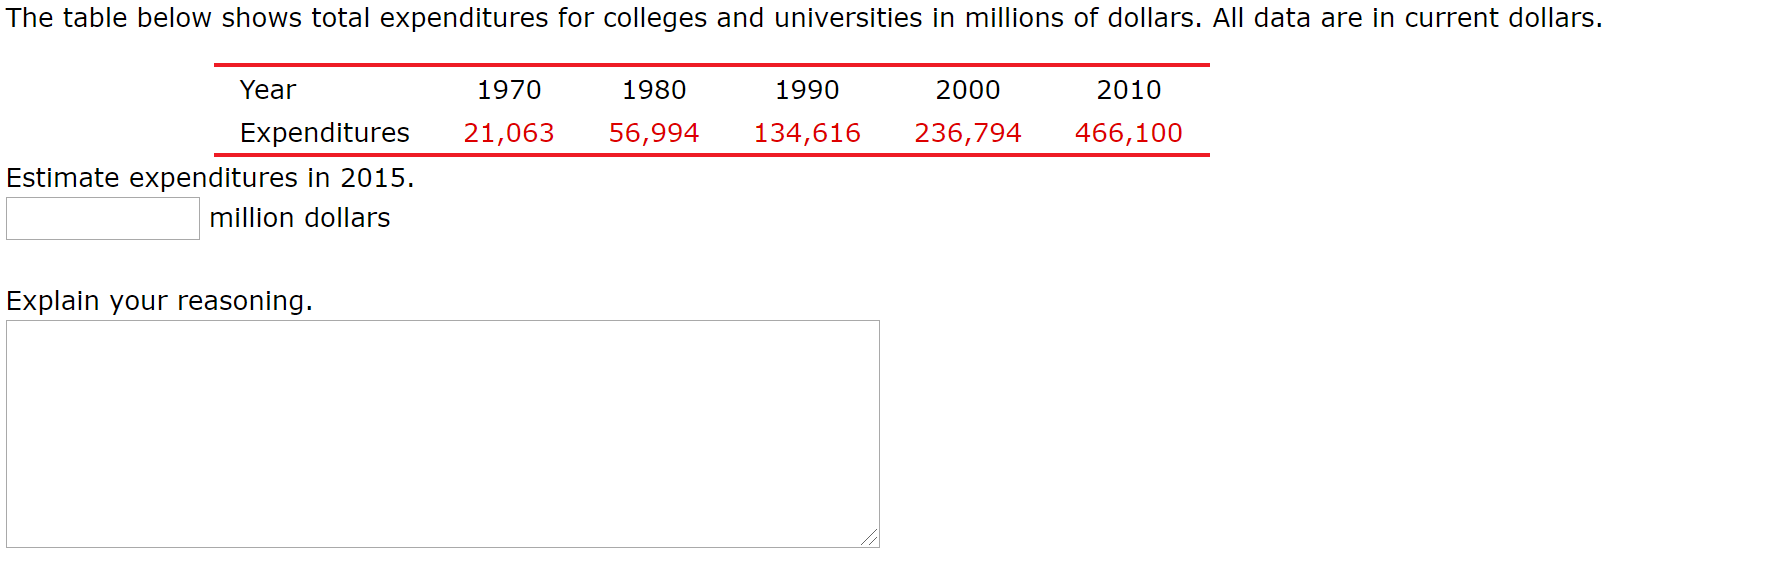 The table below shows total expenditures for colleges and universities in millions of dollars. All data are in current dollars.
Year
1970
1980
1990
2000
2010
Expenditures
56,994
21,063
134,616
236,794
466,100
Estimate expenditures in 2015.
million dollars
Explain your reasoning.
